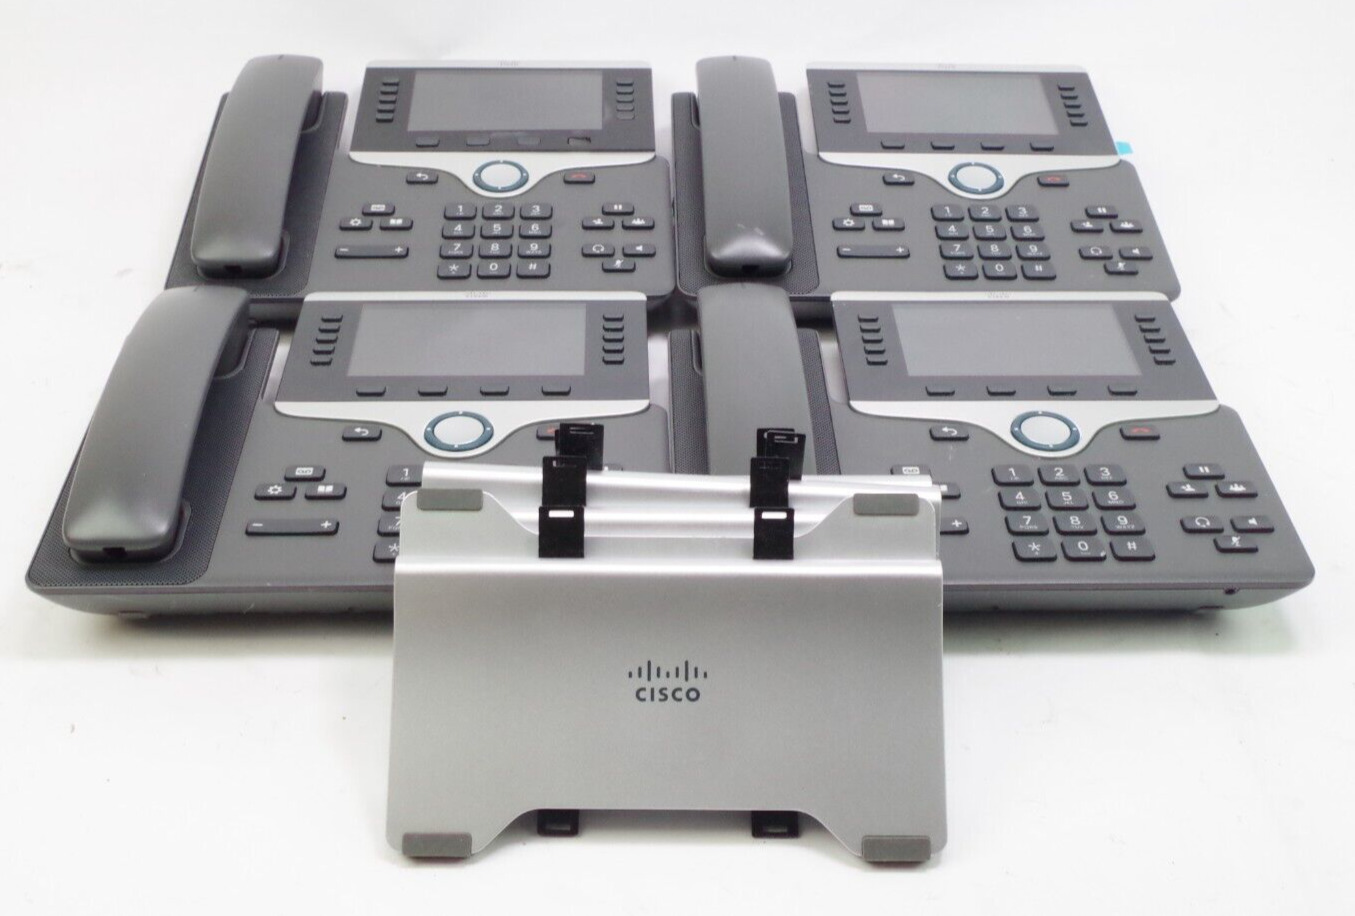 Lot of 24 Cisco 8811 Series VoIP Phones W/Handsets and Stands Only READ DESCRIP